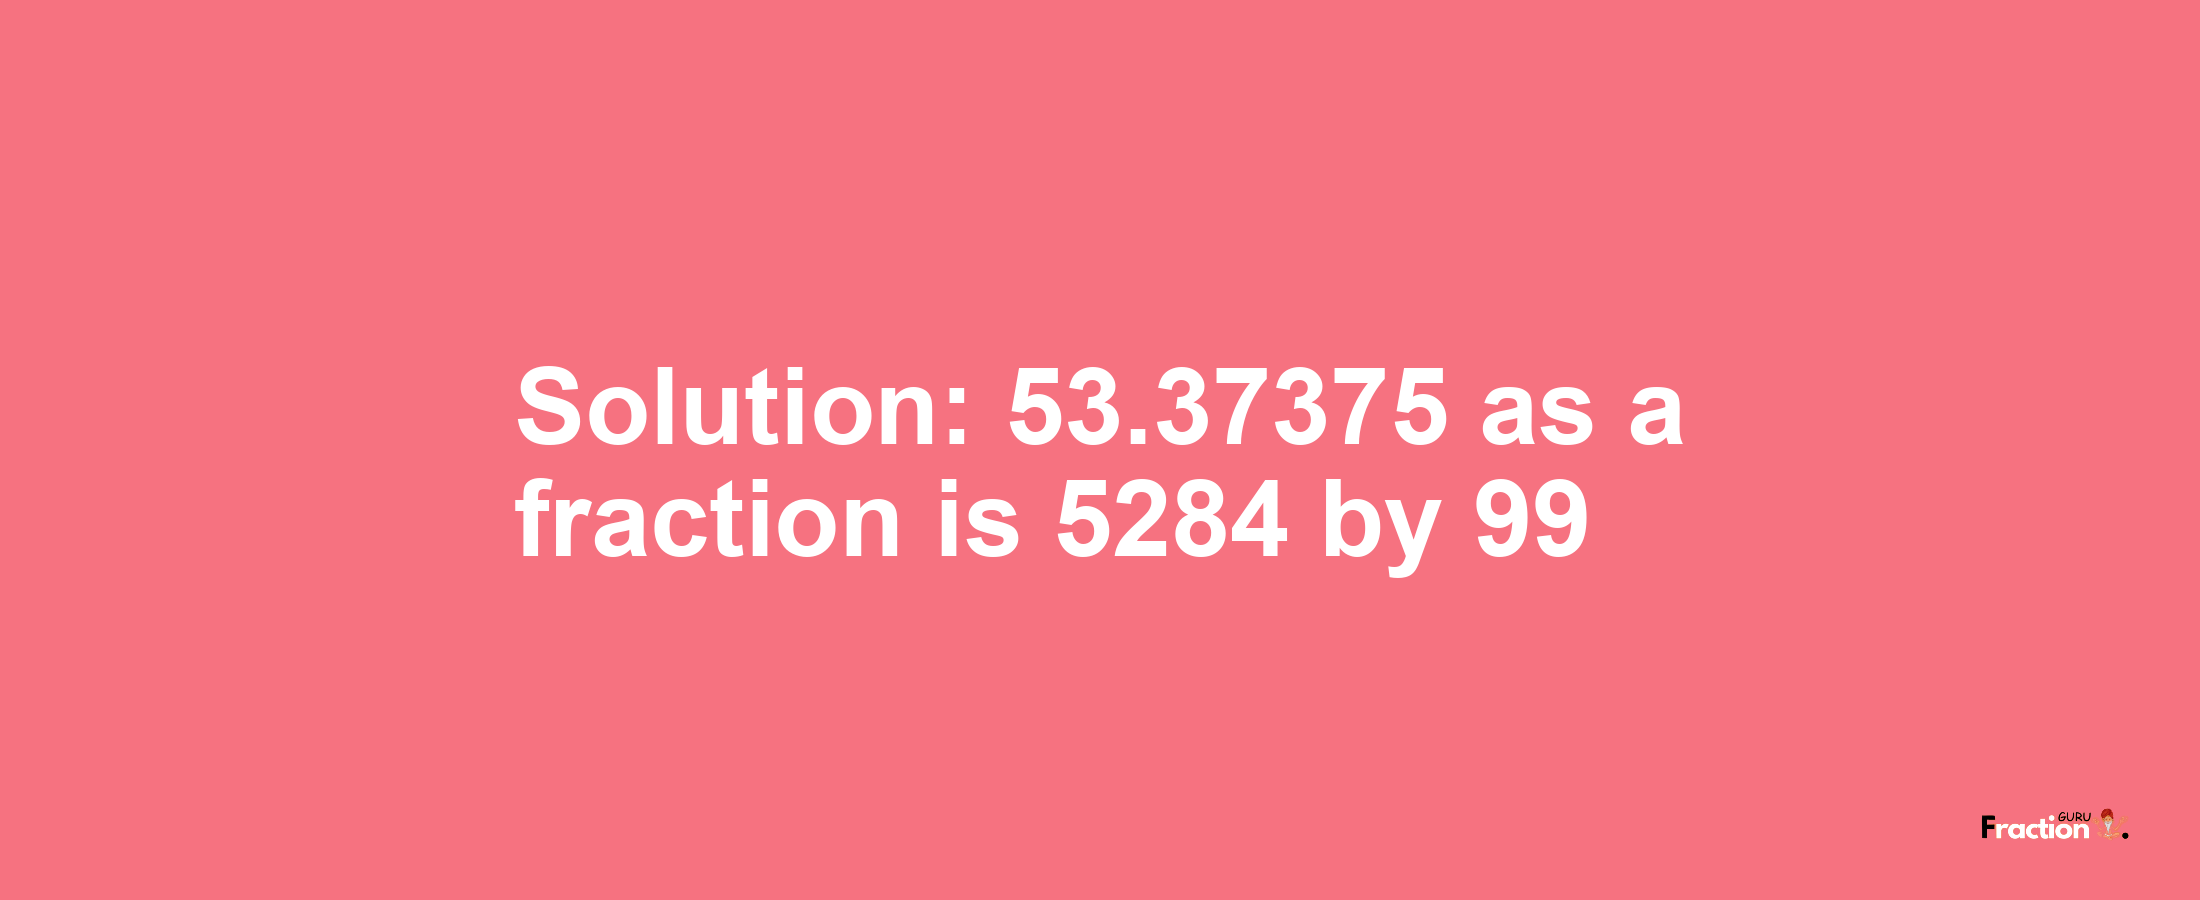 Solution:53.37375 as a fraction is 5284/99